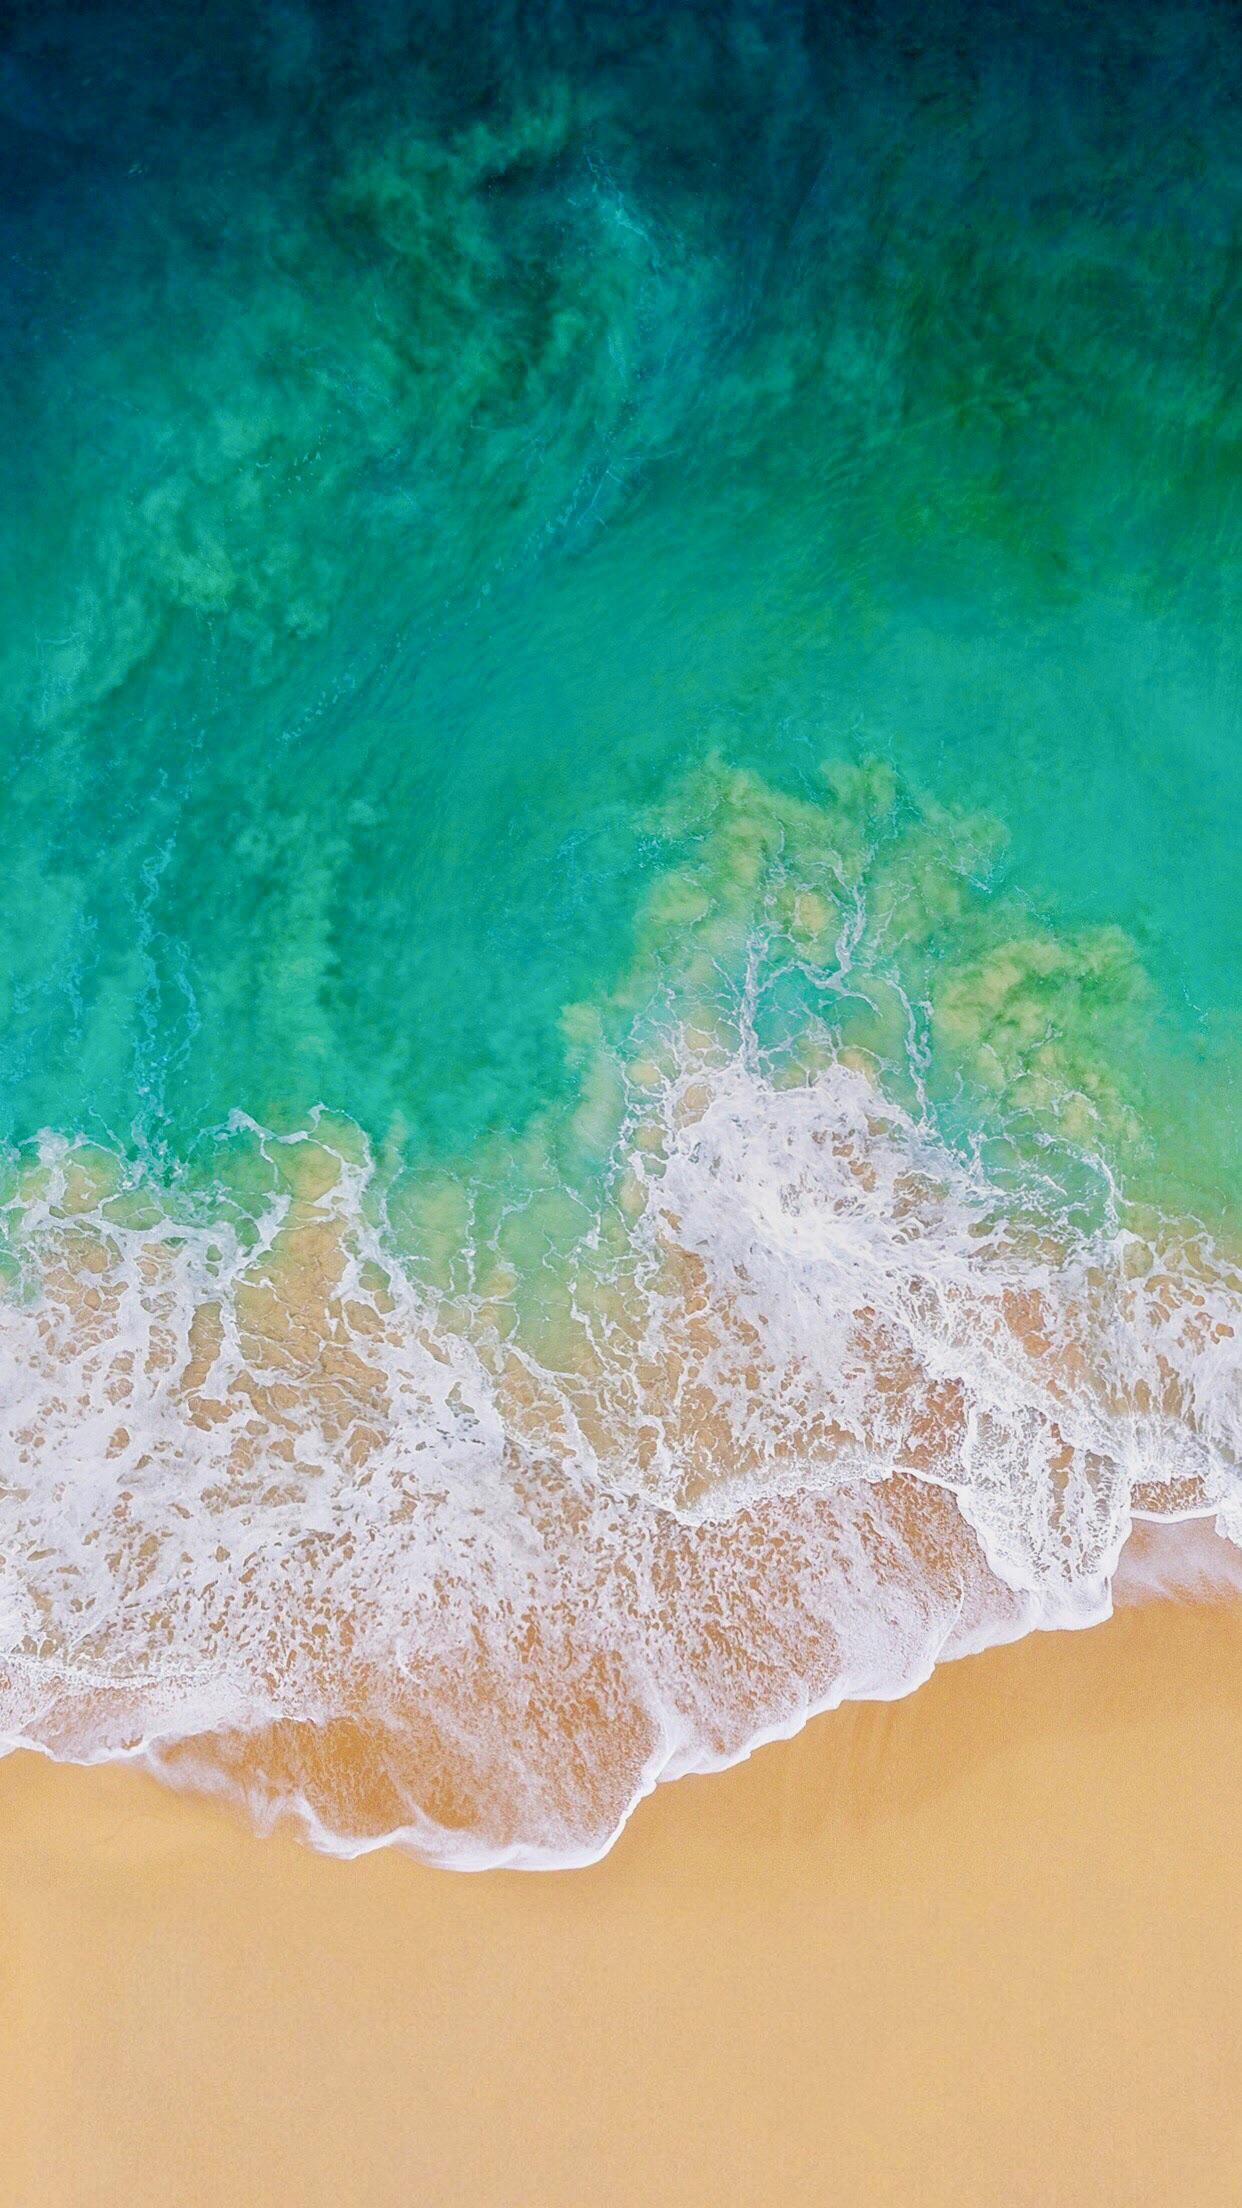 is anyone able to resise the ios 11 stock wallpaper from an iphone